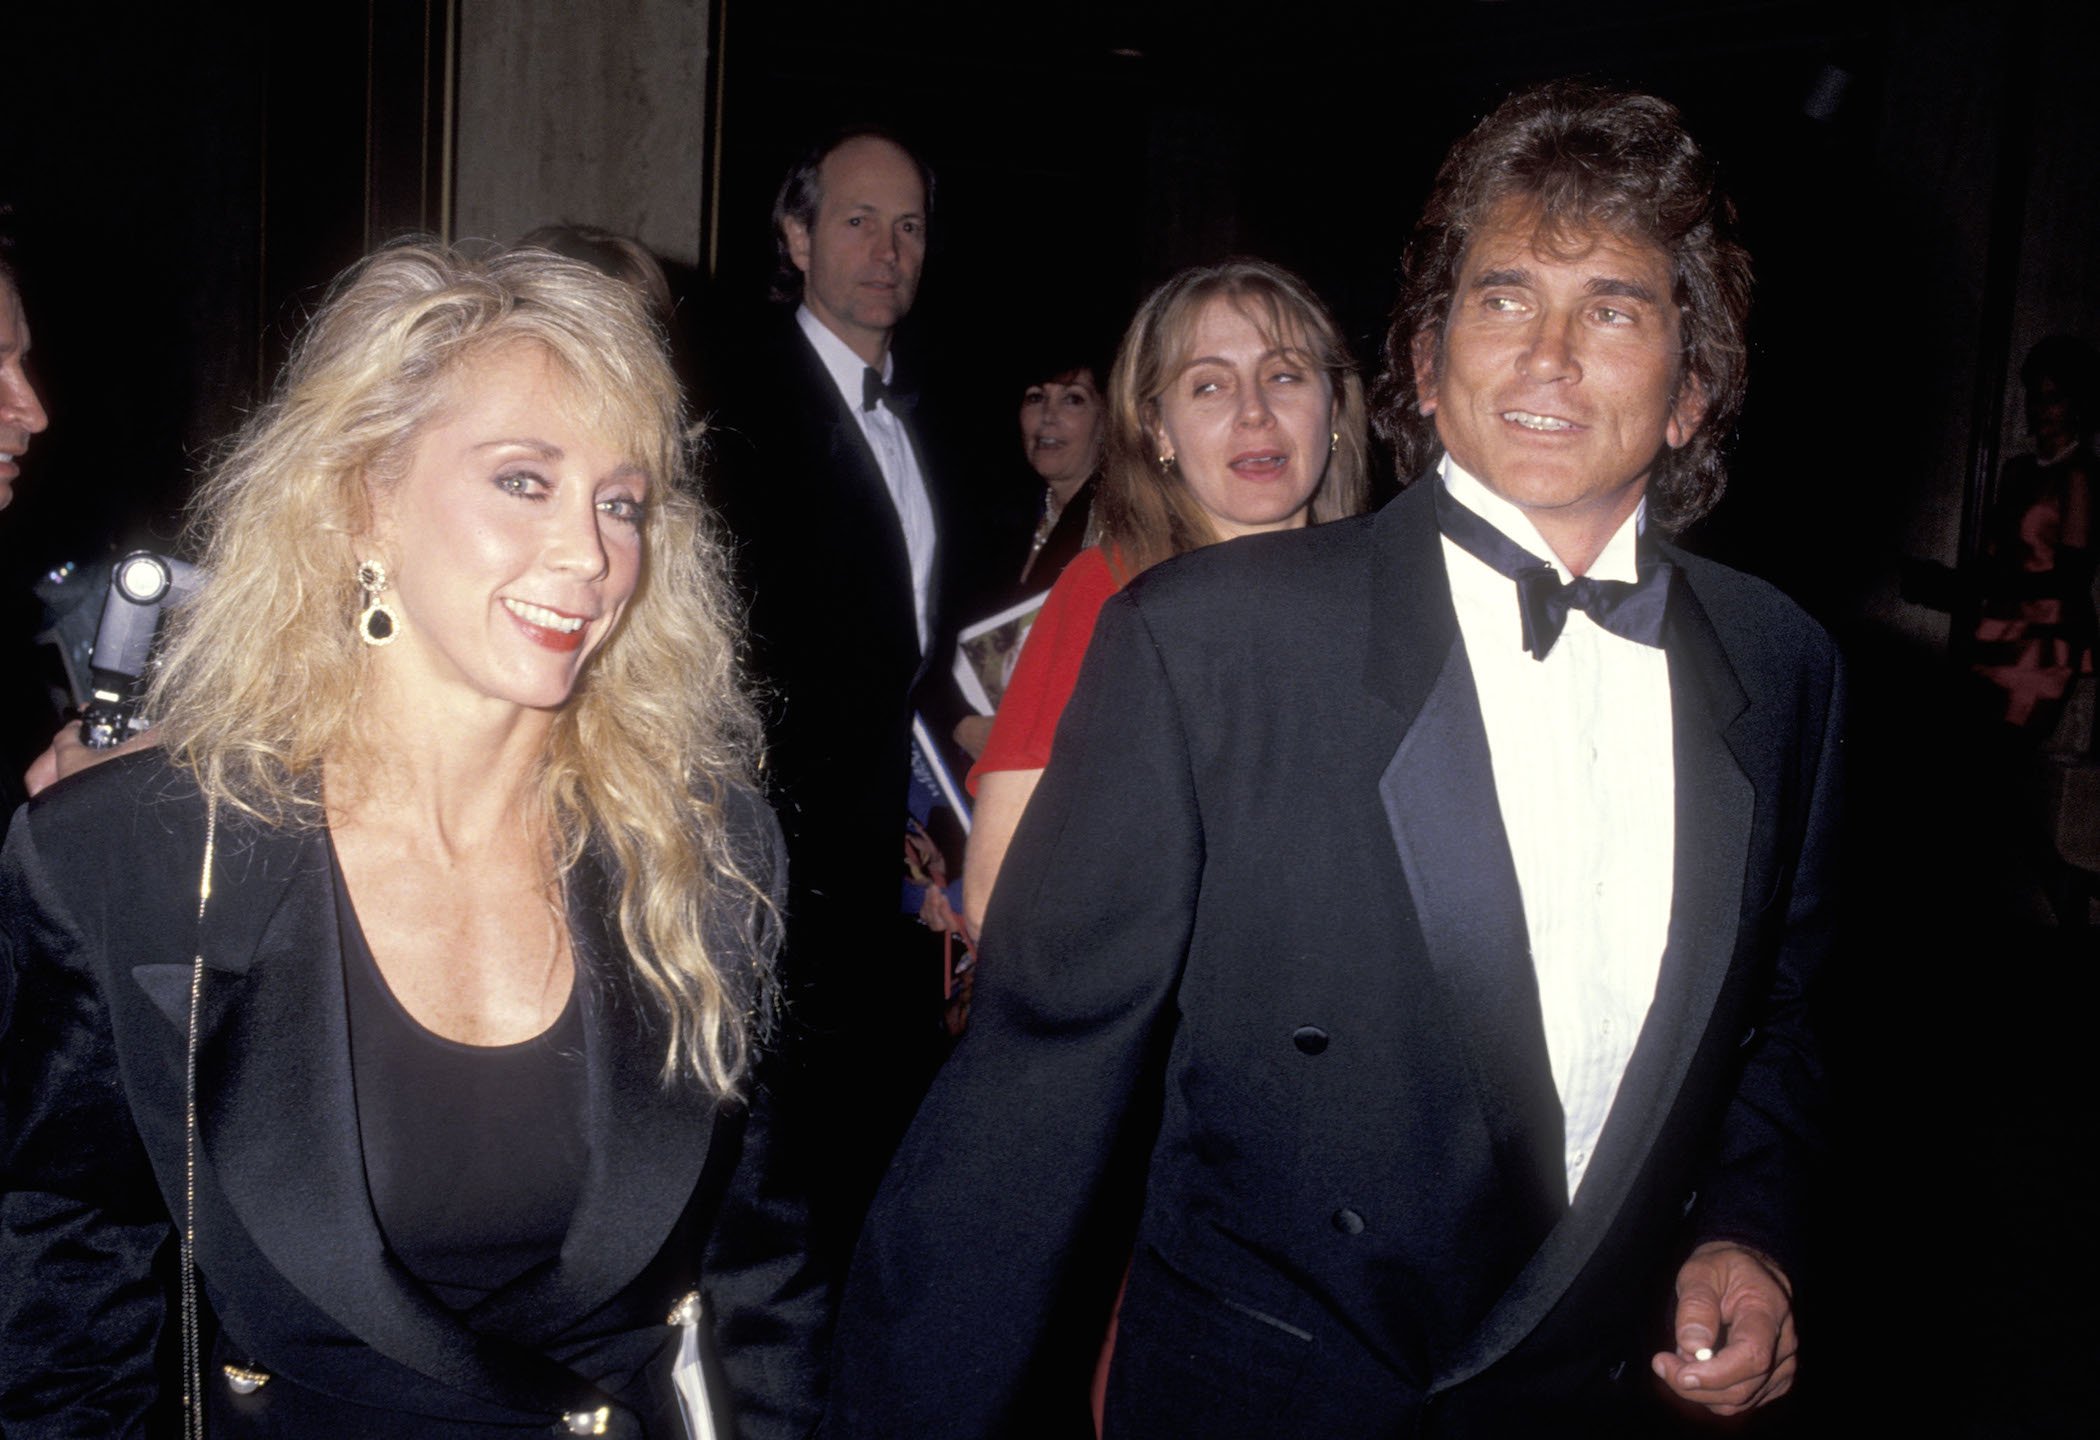 'Little House on the Trailer' star Michael Landon and wife Cindy Landon